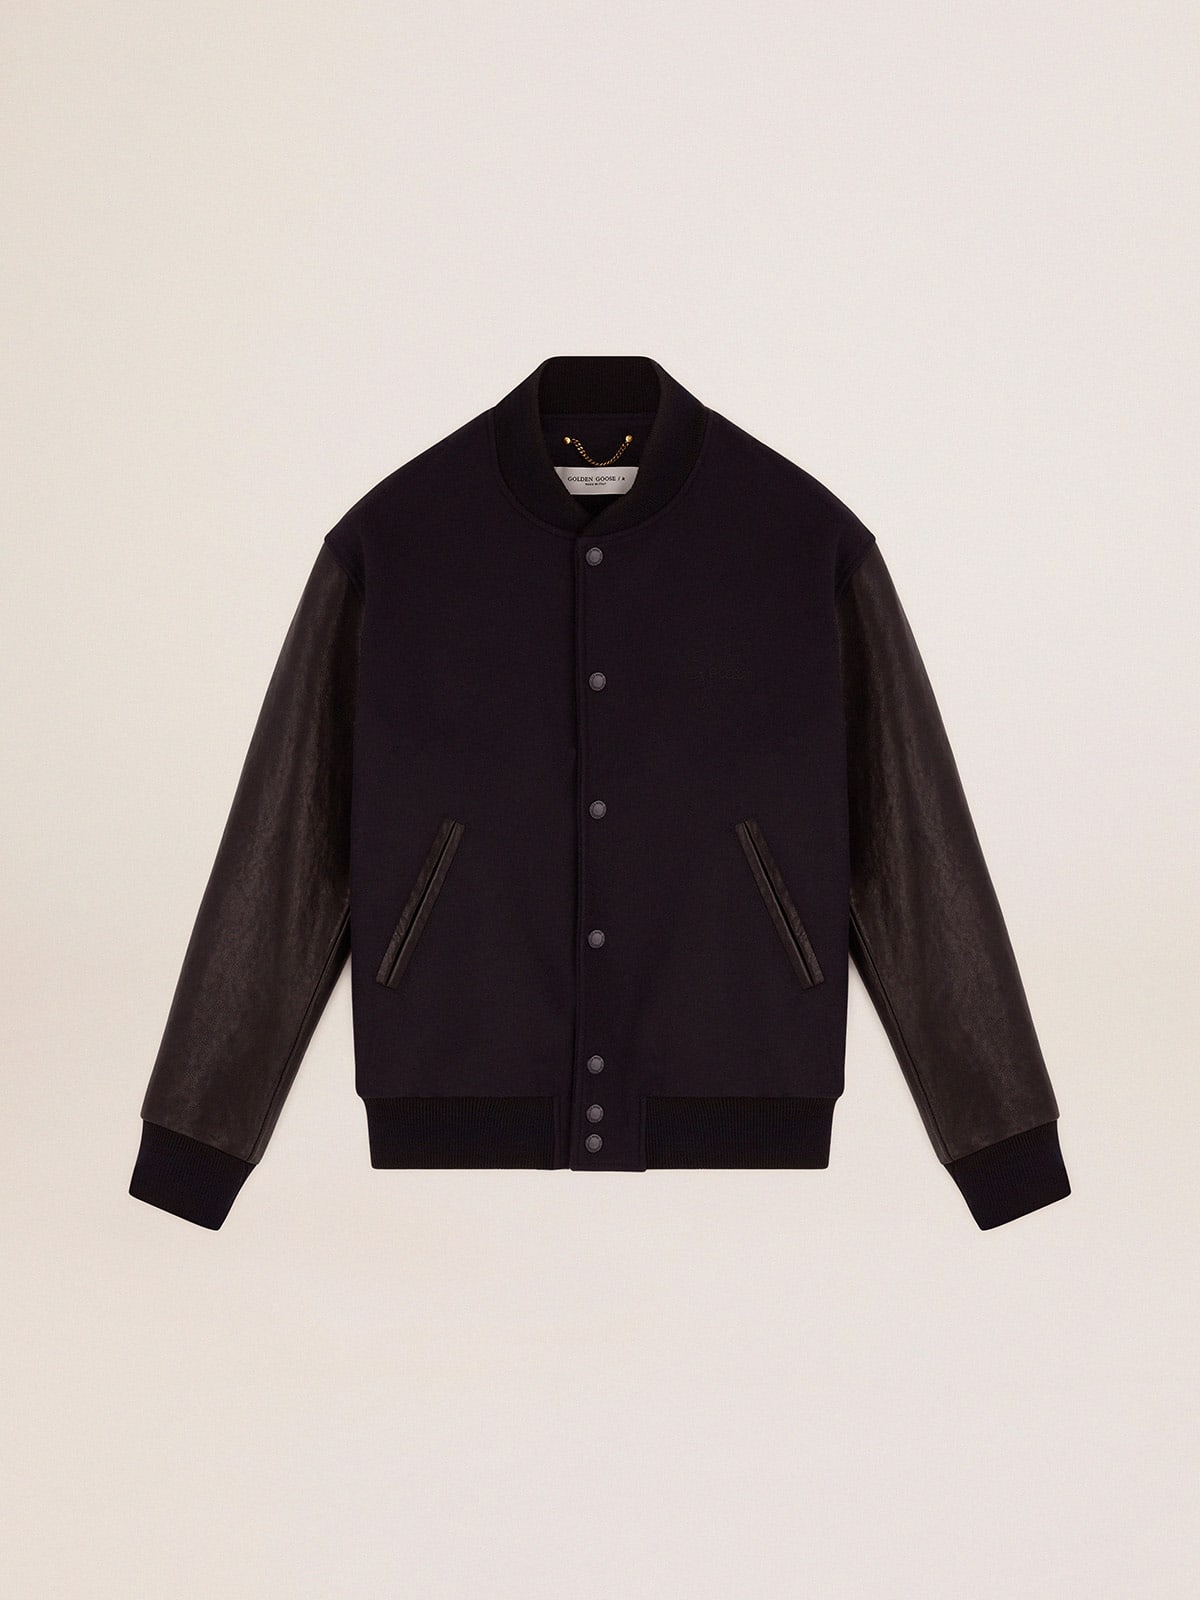 Golden Goose - Bomber jacket in dark blue wool with distressed leather sleeves in 